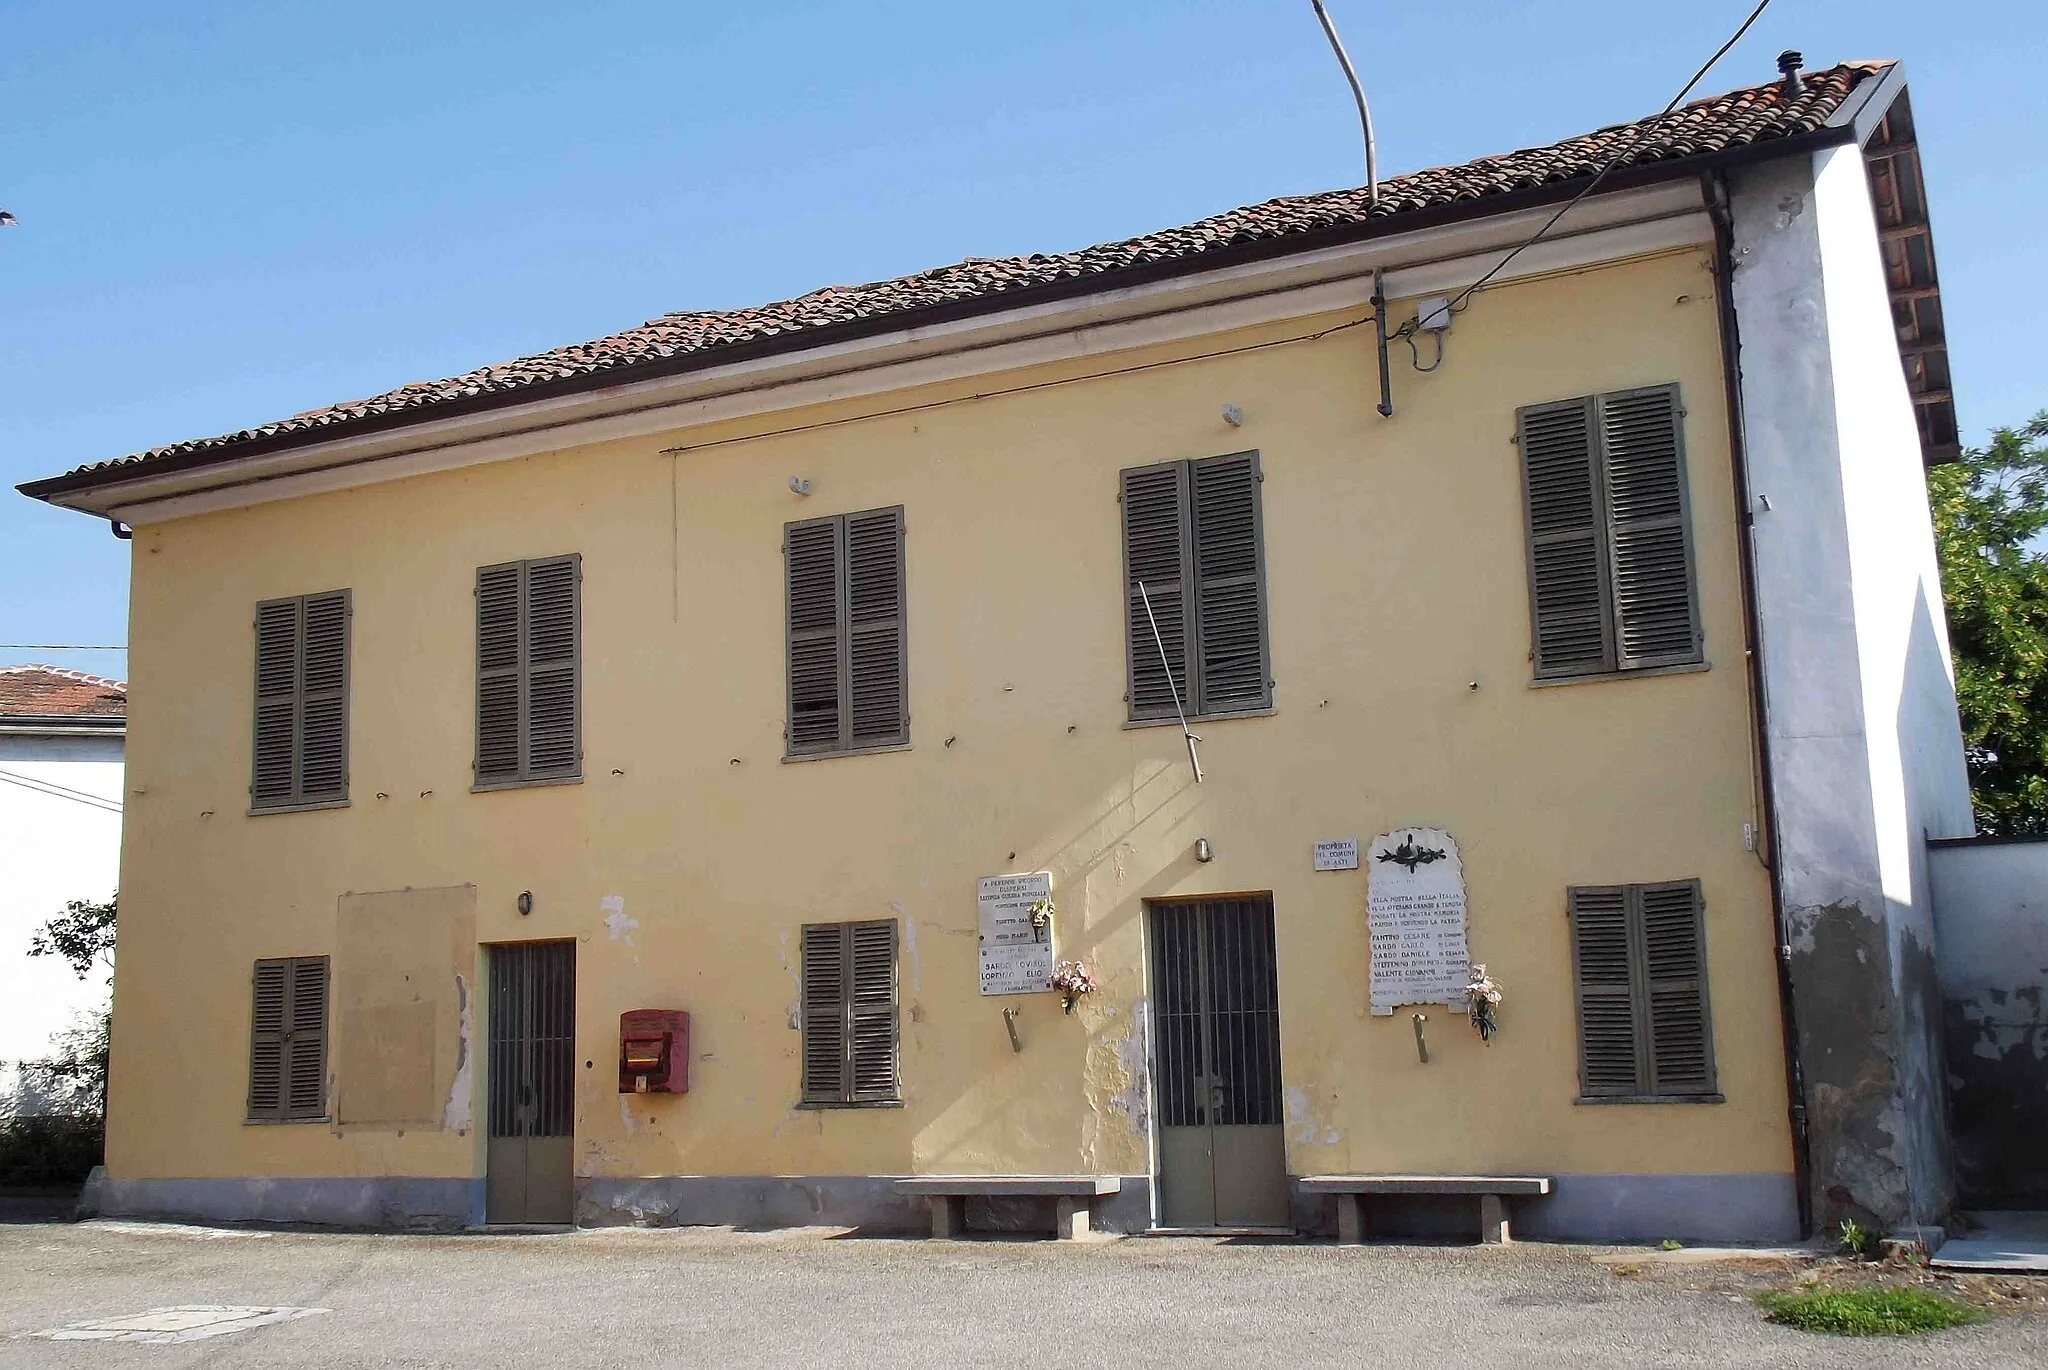 Photo showing: Vaglierano (Asti, Italy): former town hall